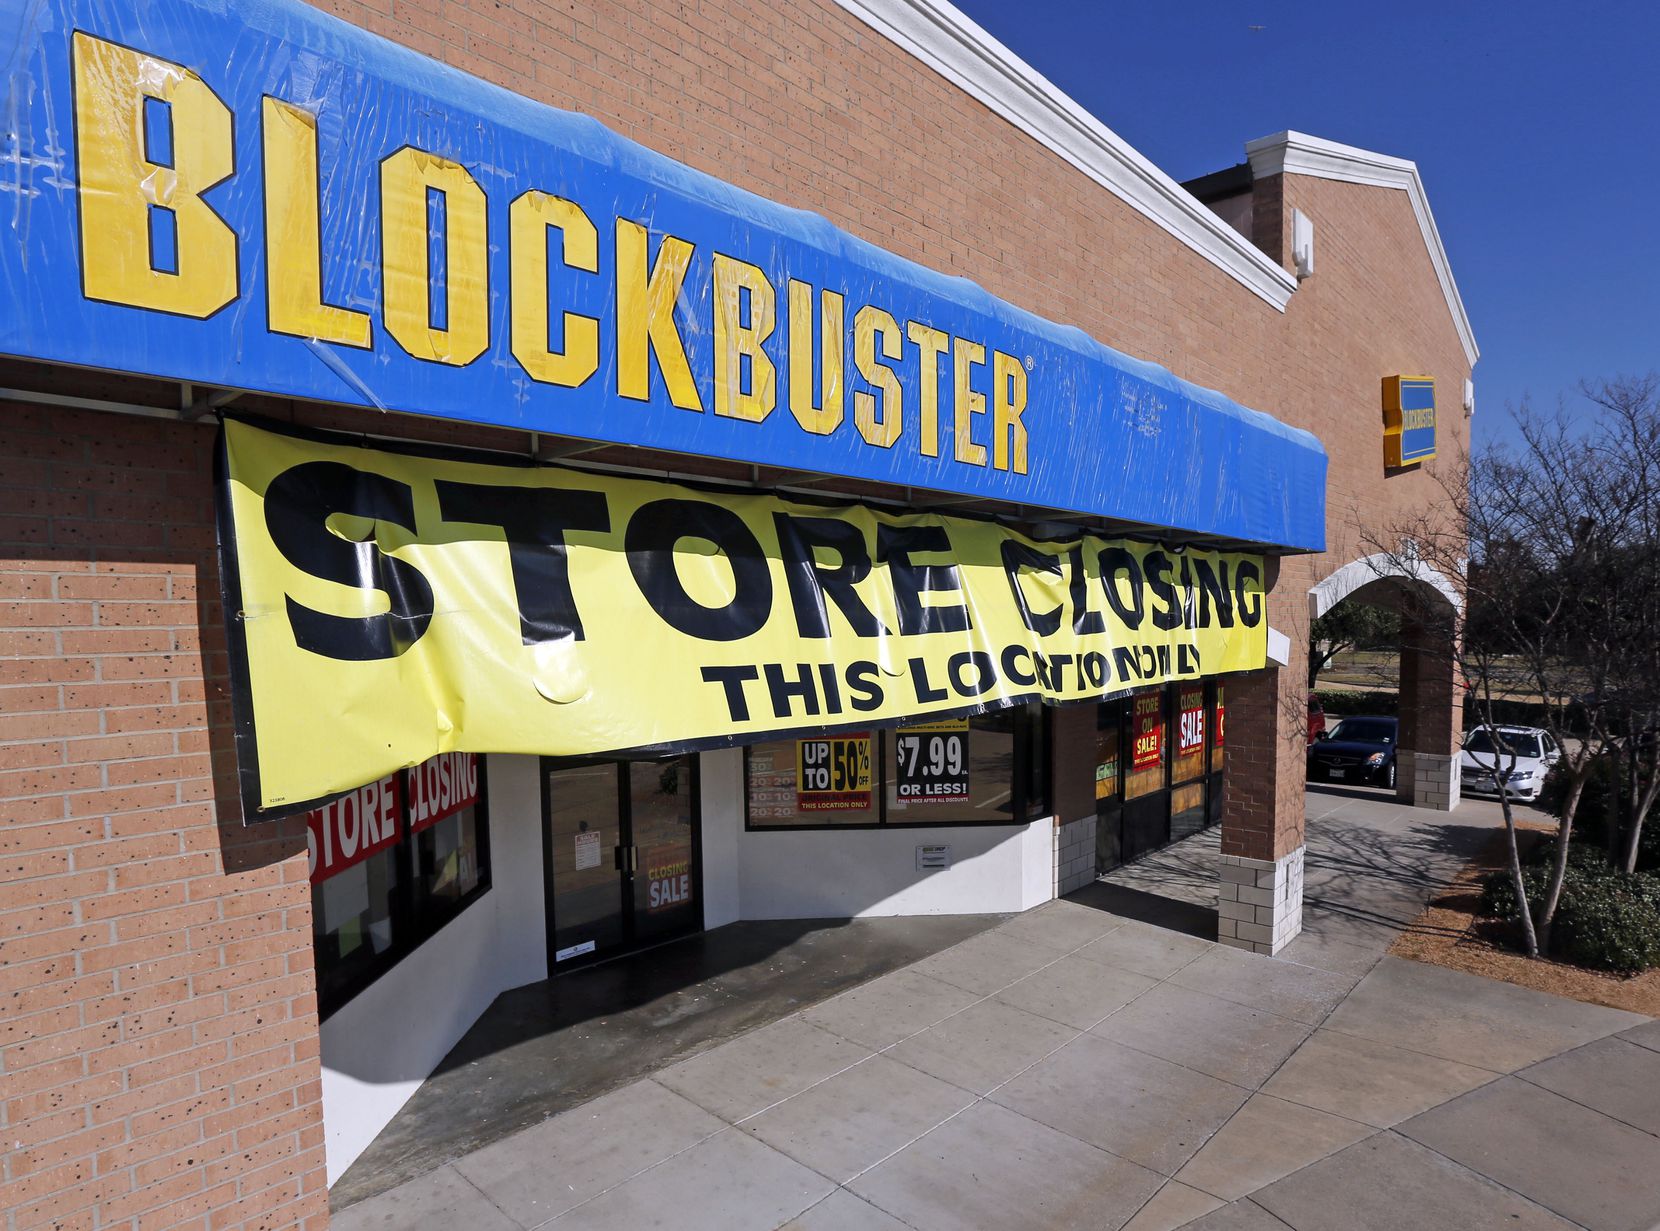 Blockbuster has announced that it will close all of its remaining company-owned stores by January...